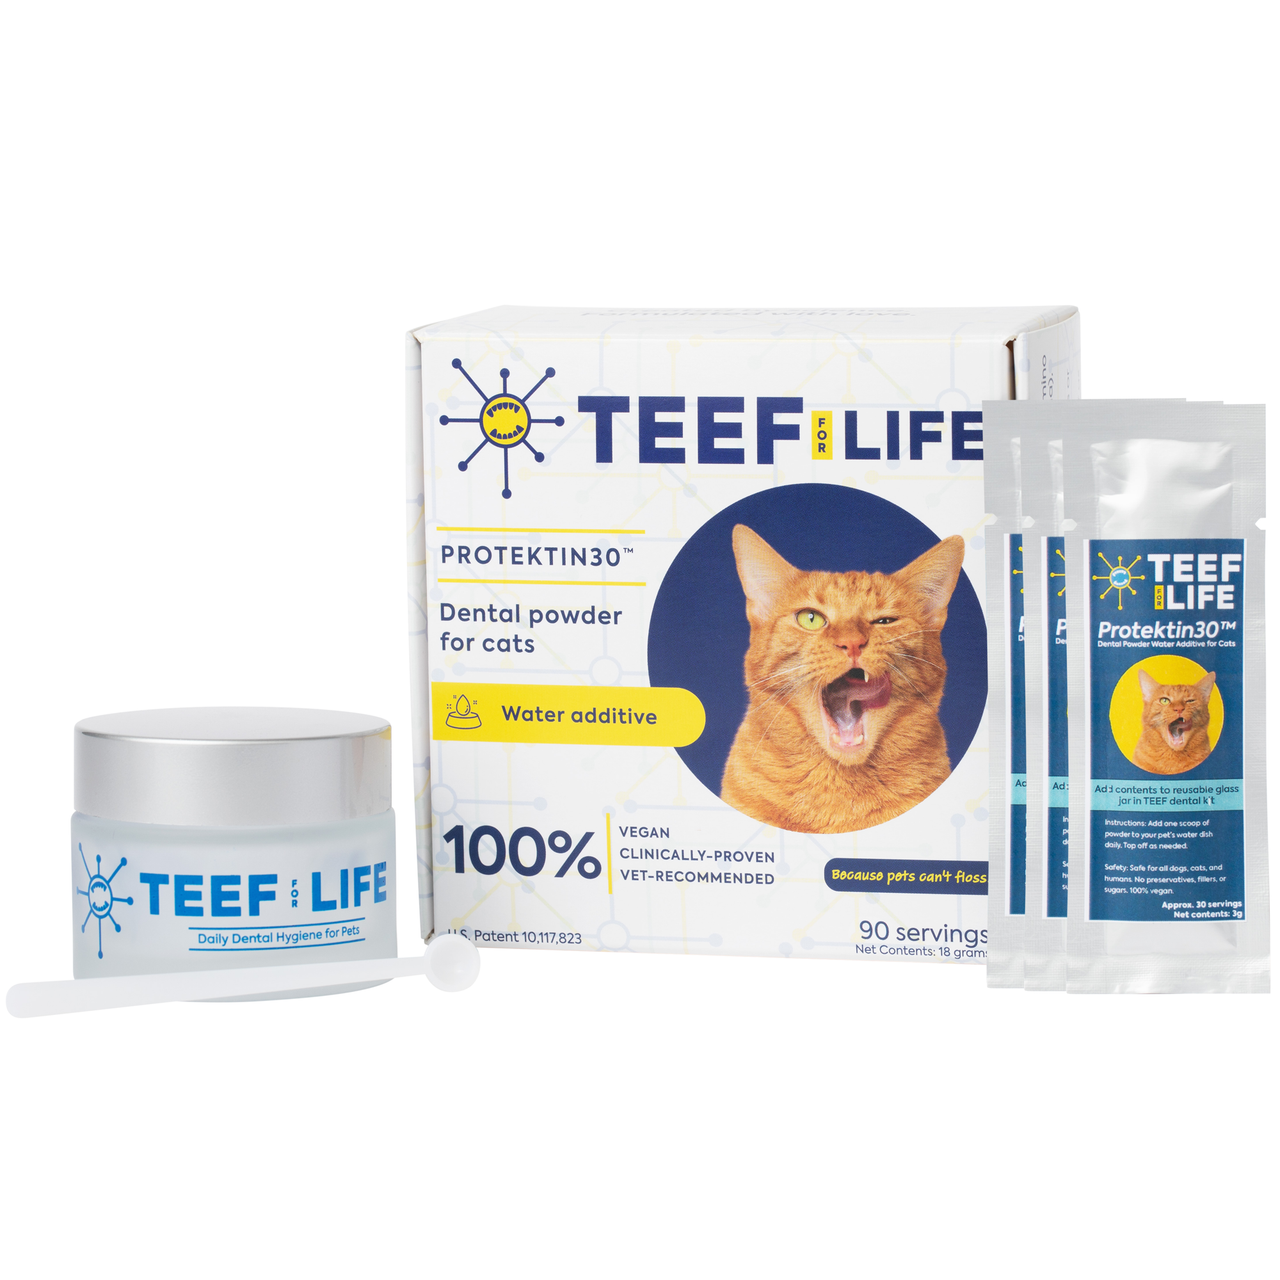 TEEF for Life: Protektin30™ for Cats